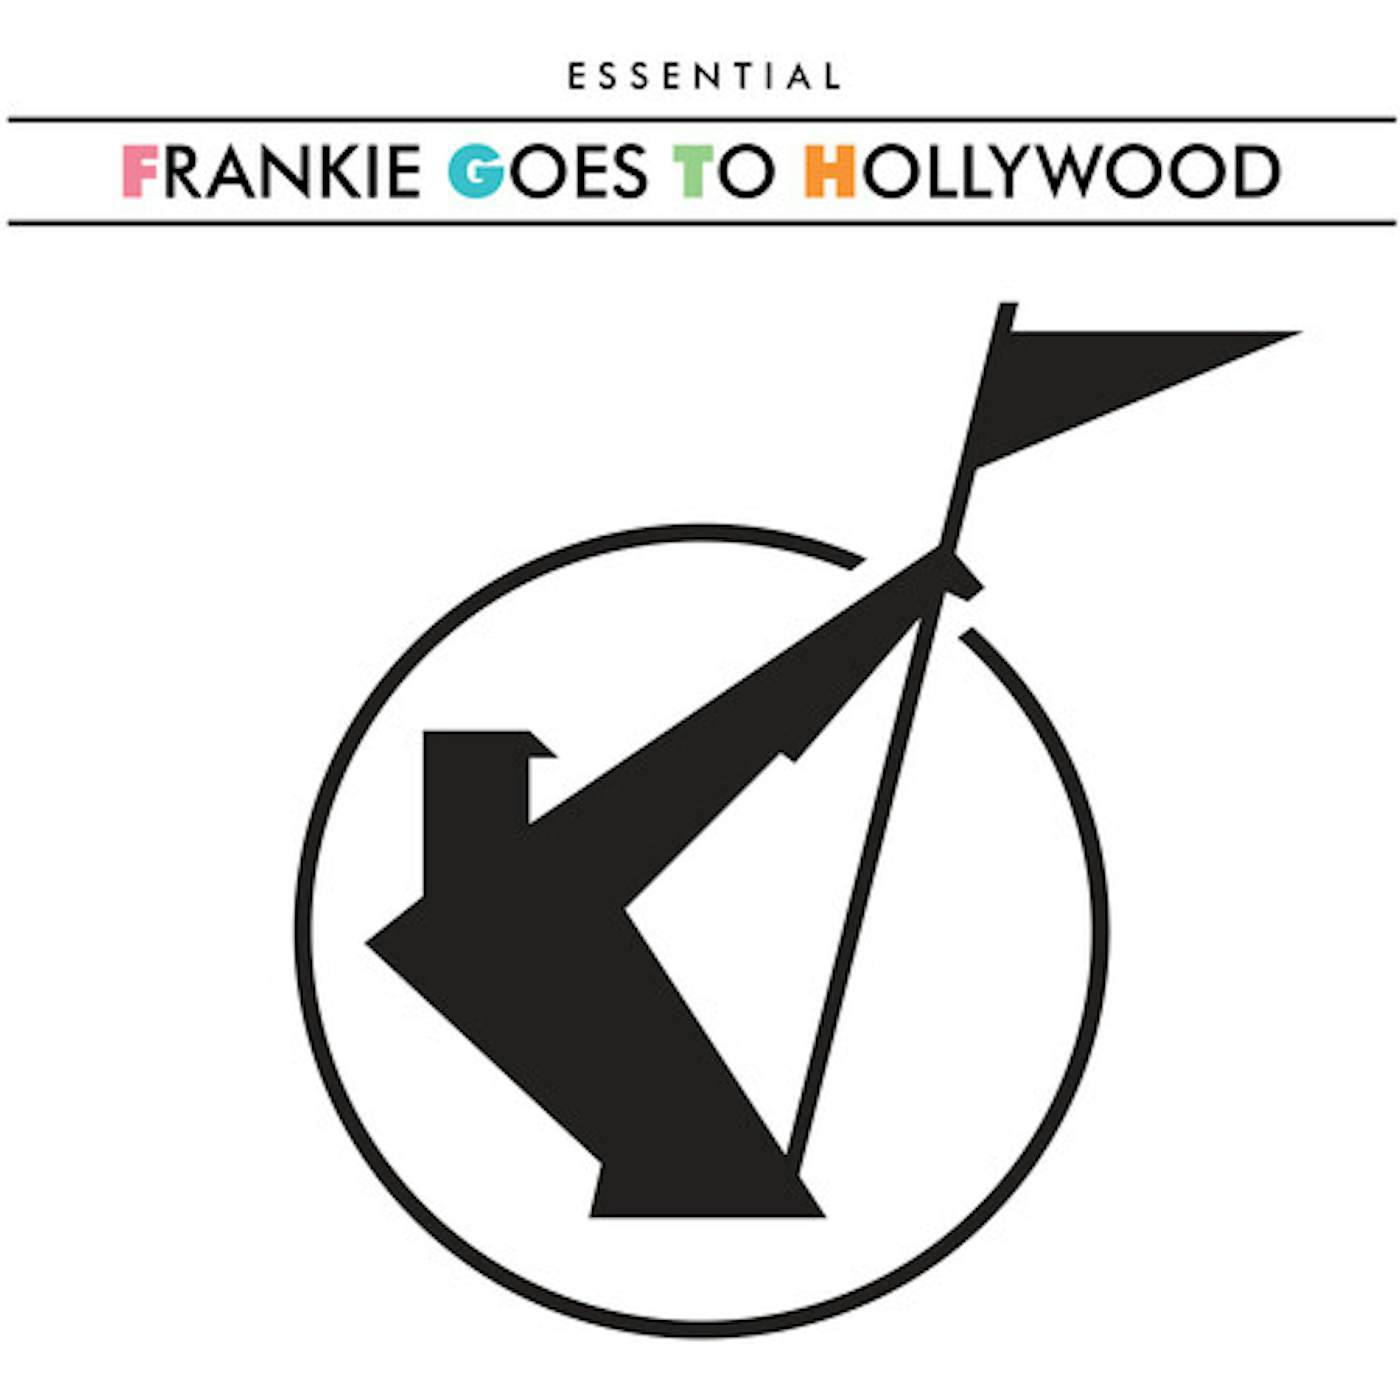 ESSENTIAL FRANKIE GOES TO HOLLYWOOD CD